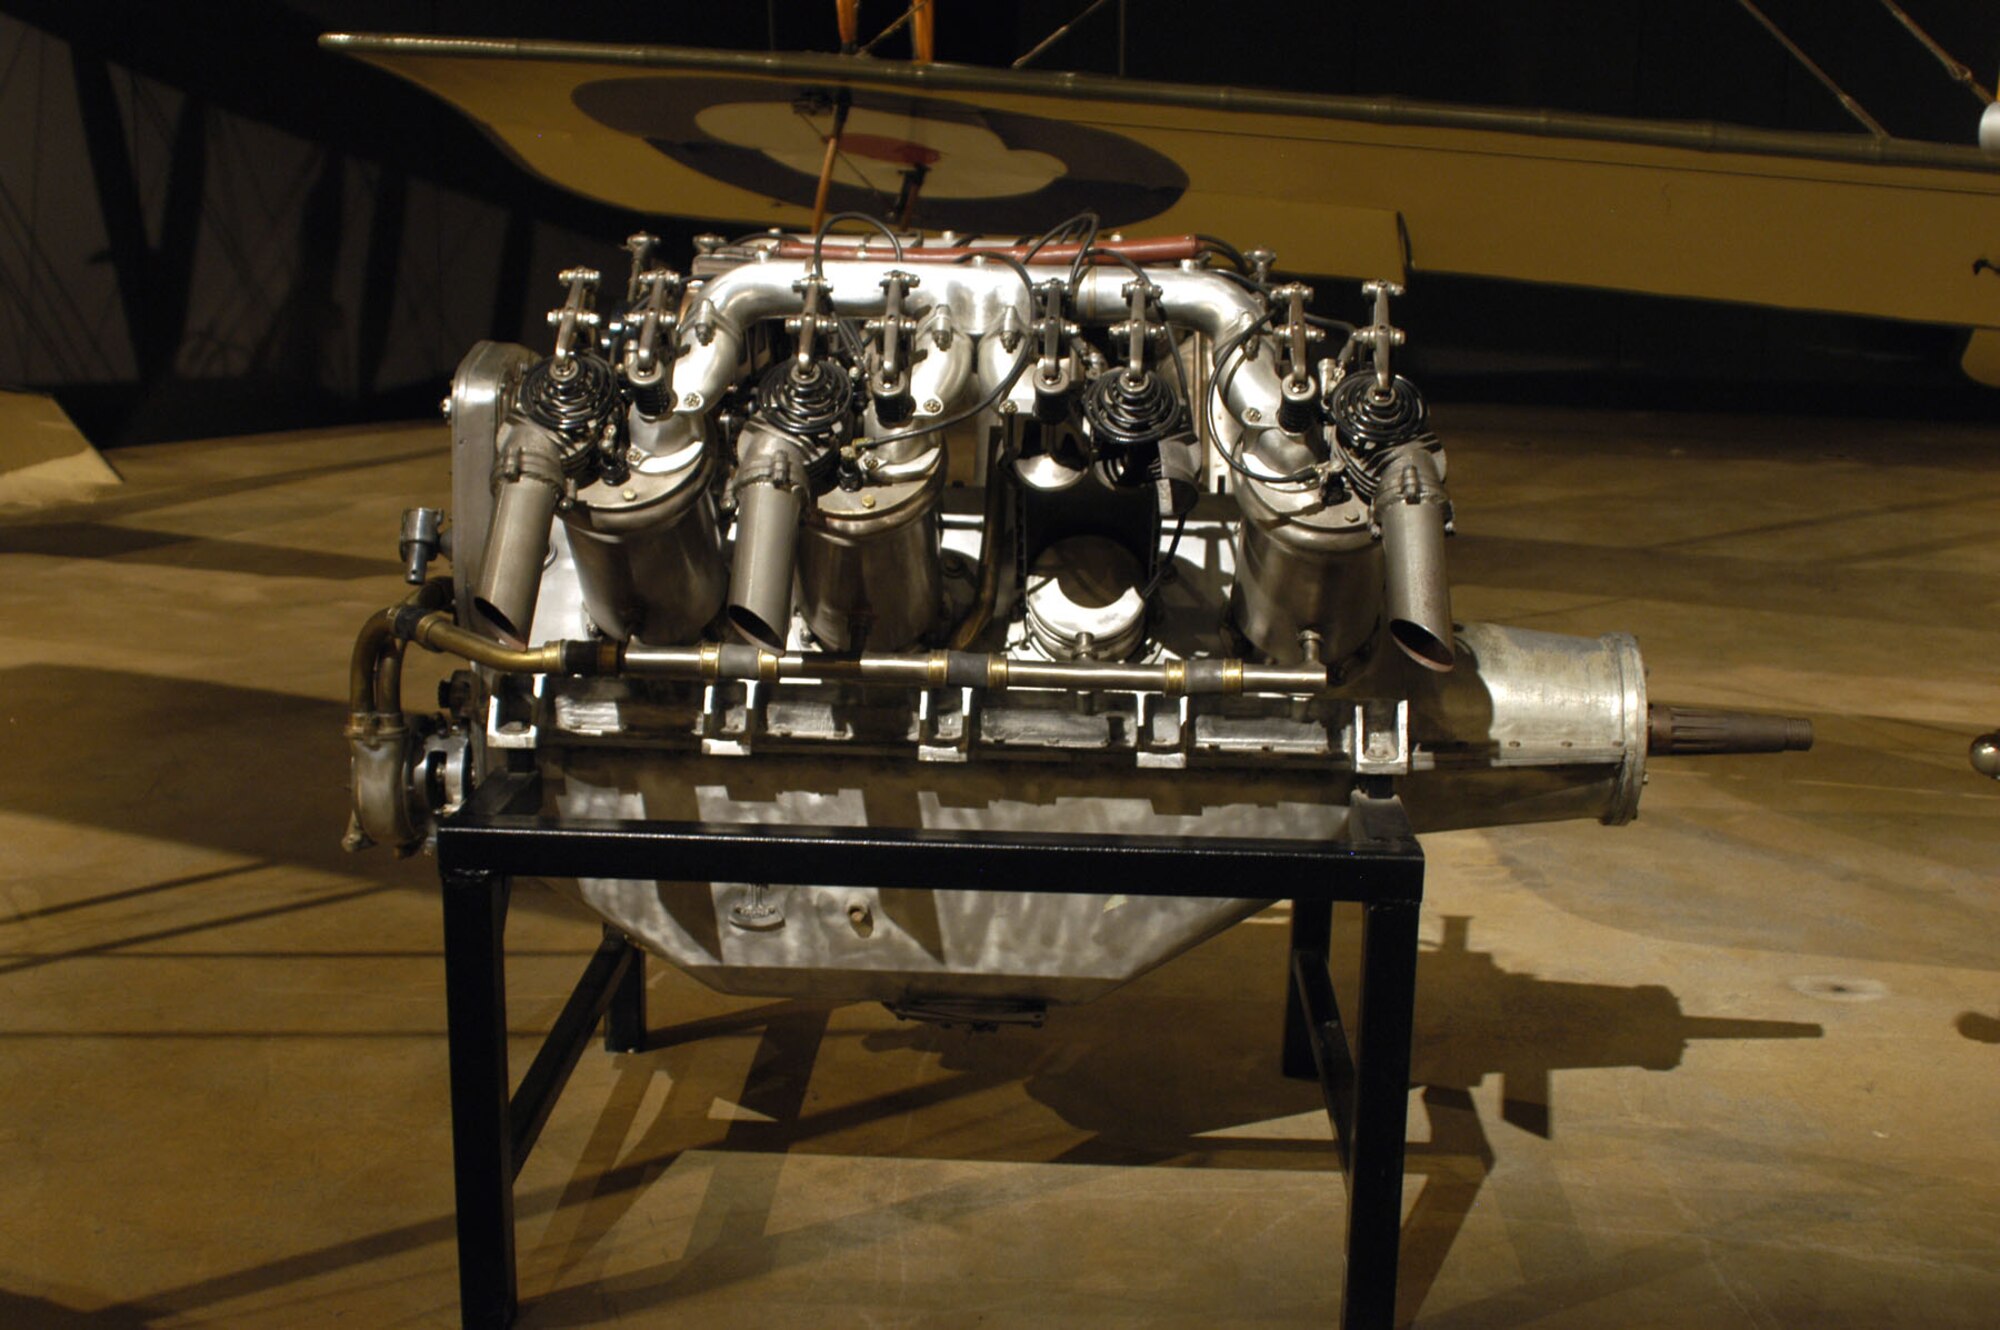 DAYTON, Ohio -- Curtiss V2-3 engine on display in the Early Years Gallery at the National Museum of the United States Air Force. (U.S. Air Force photo)